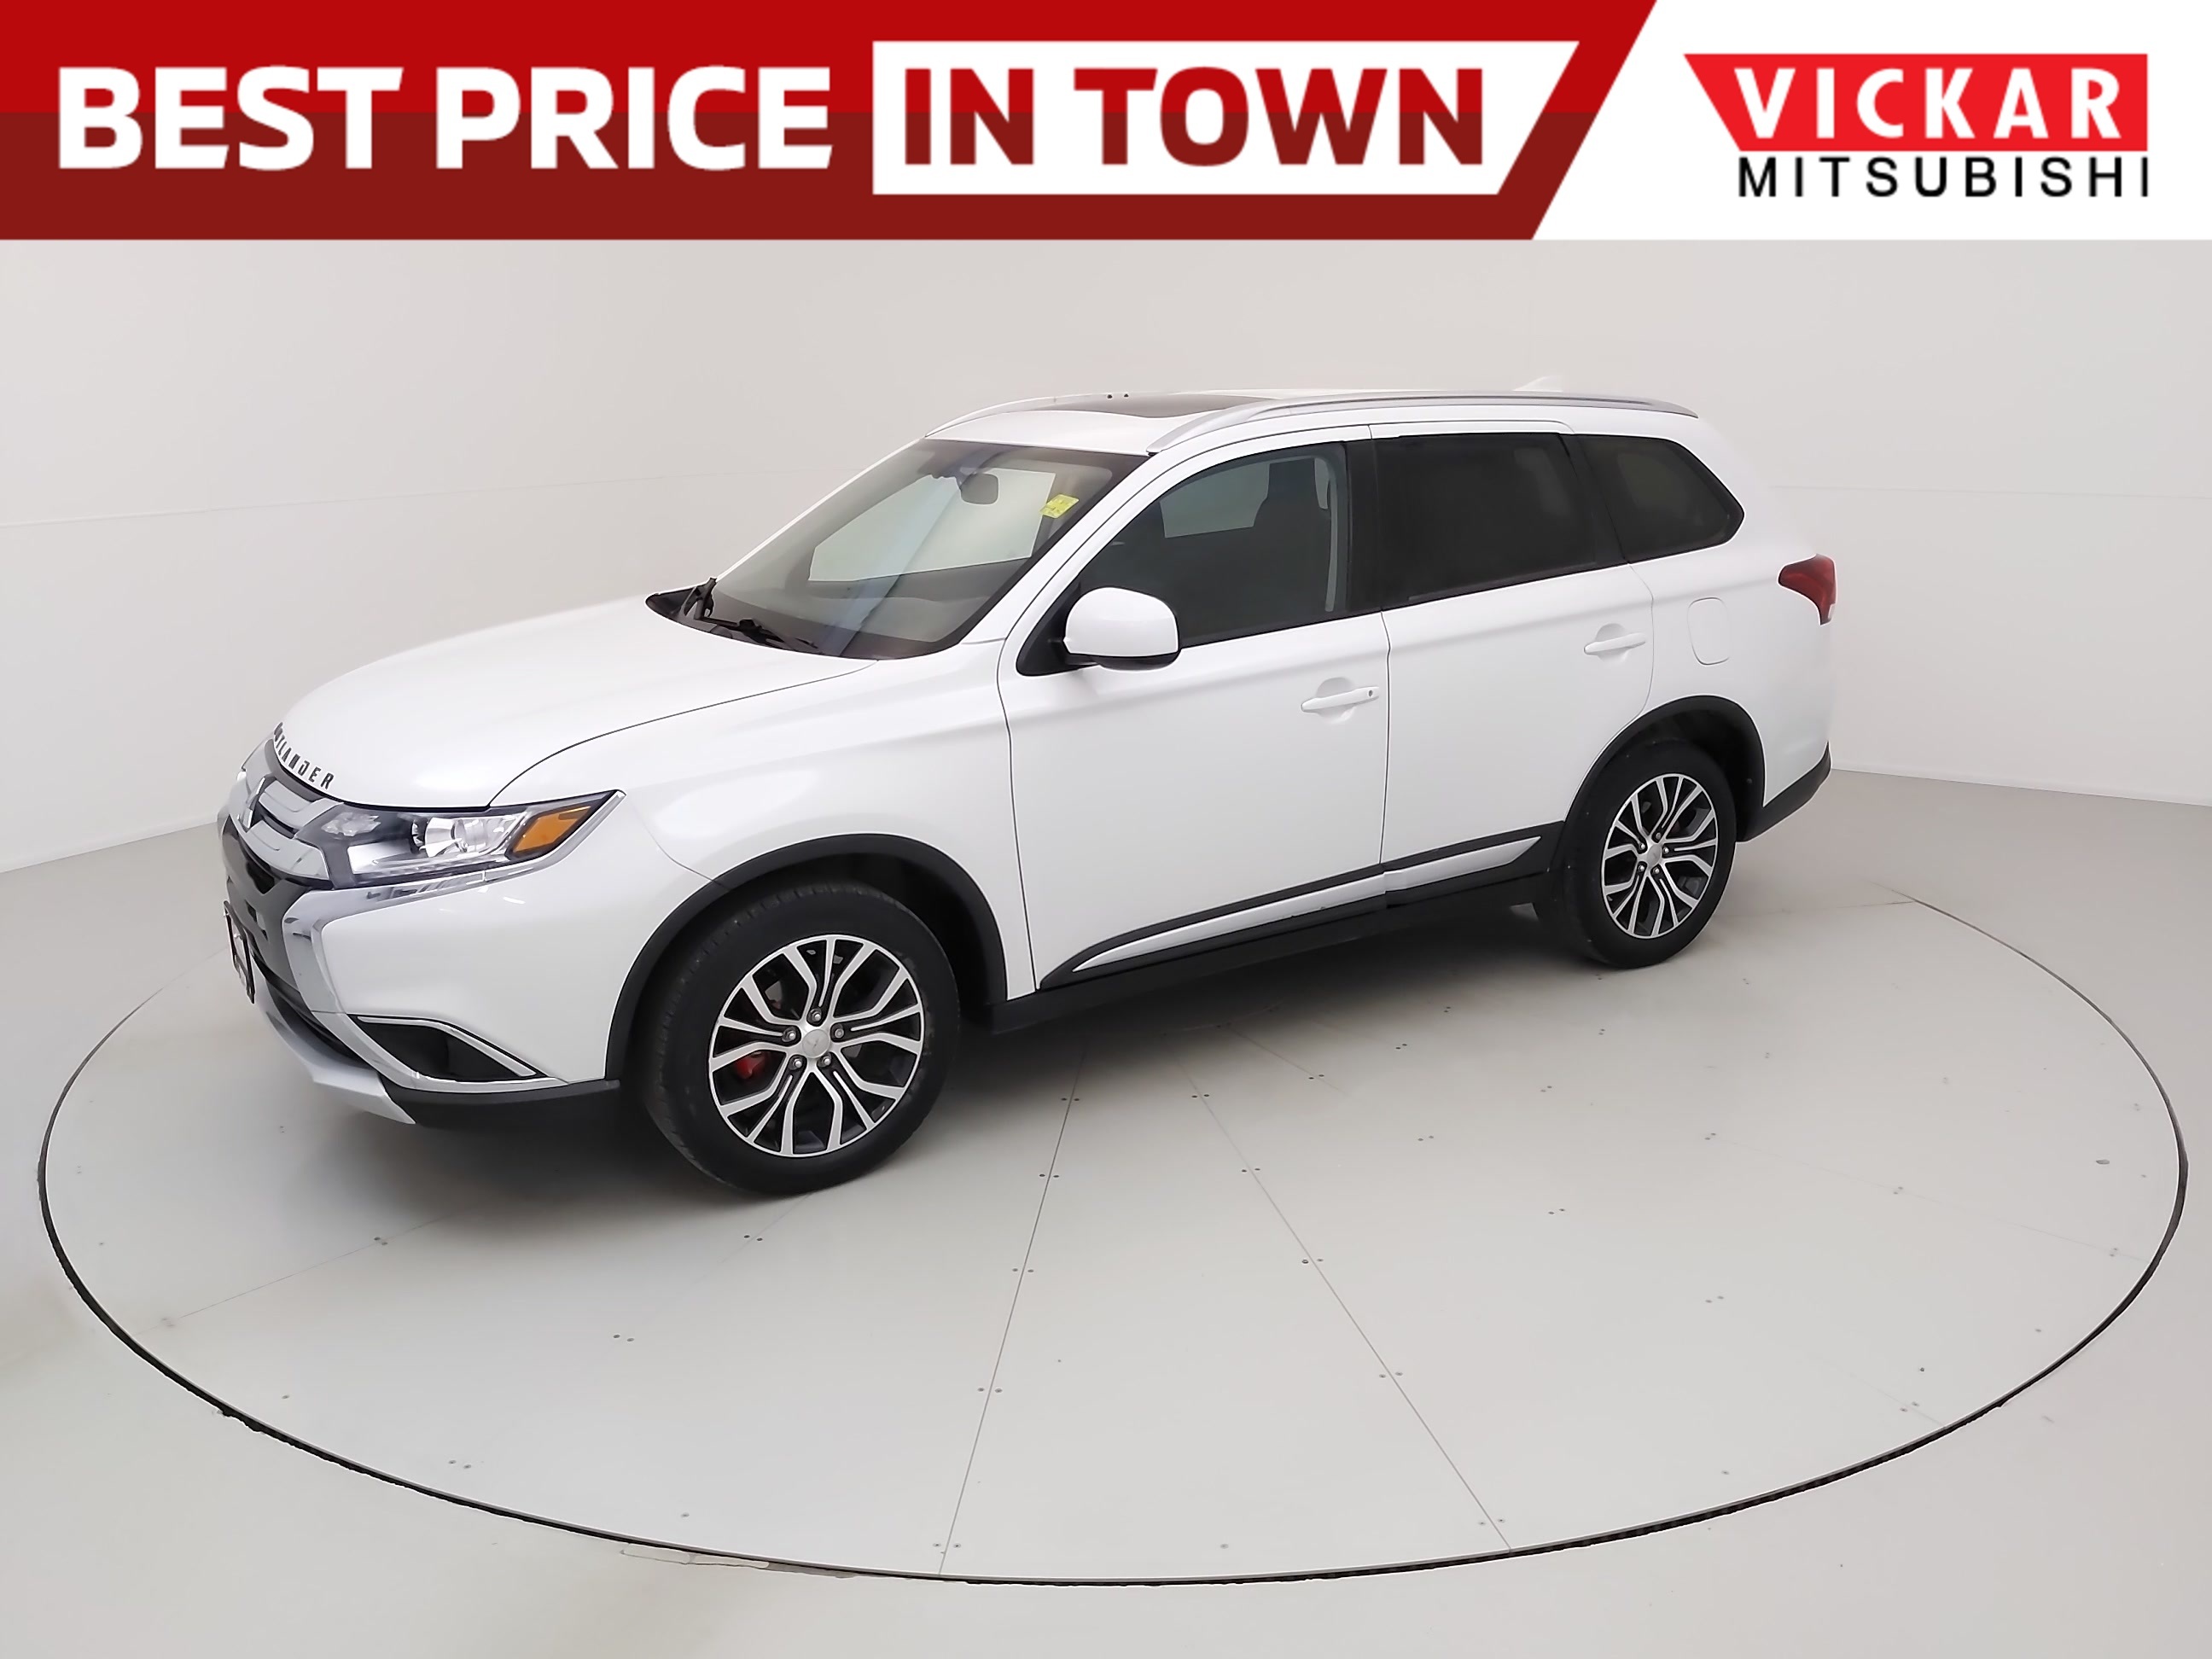 2018 Mitsubishi Outlander ES AWC One owner Local trade 